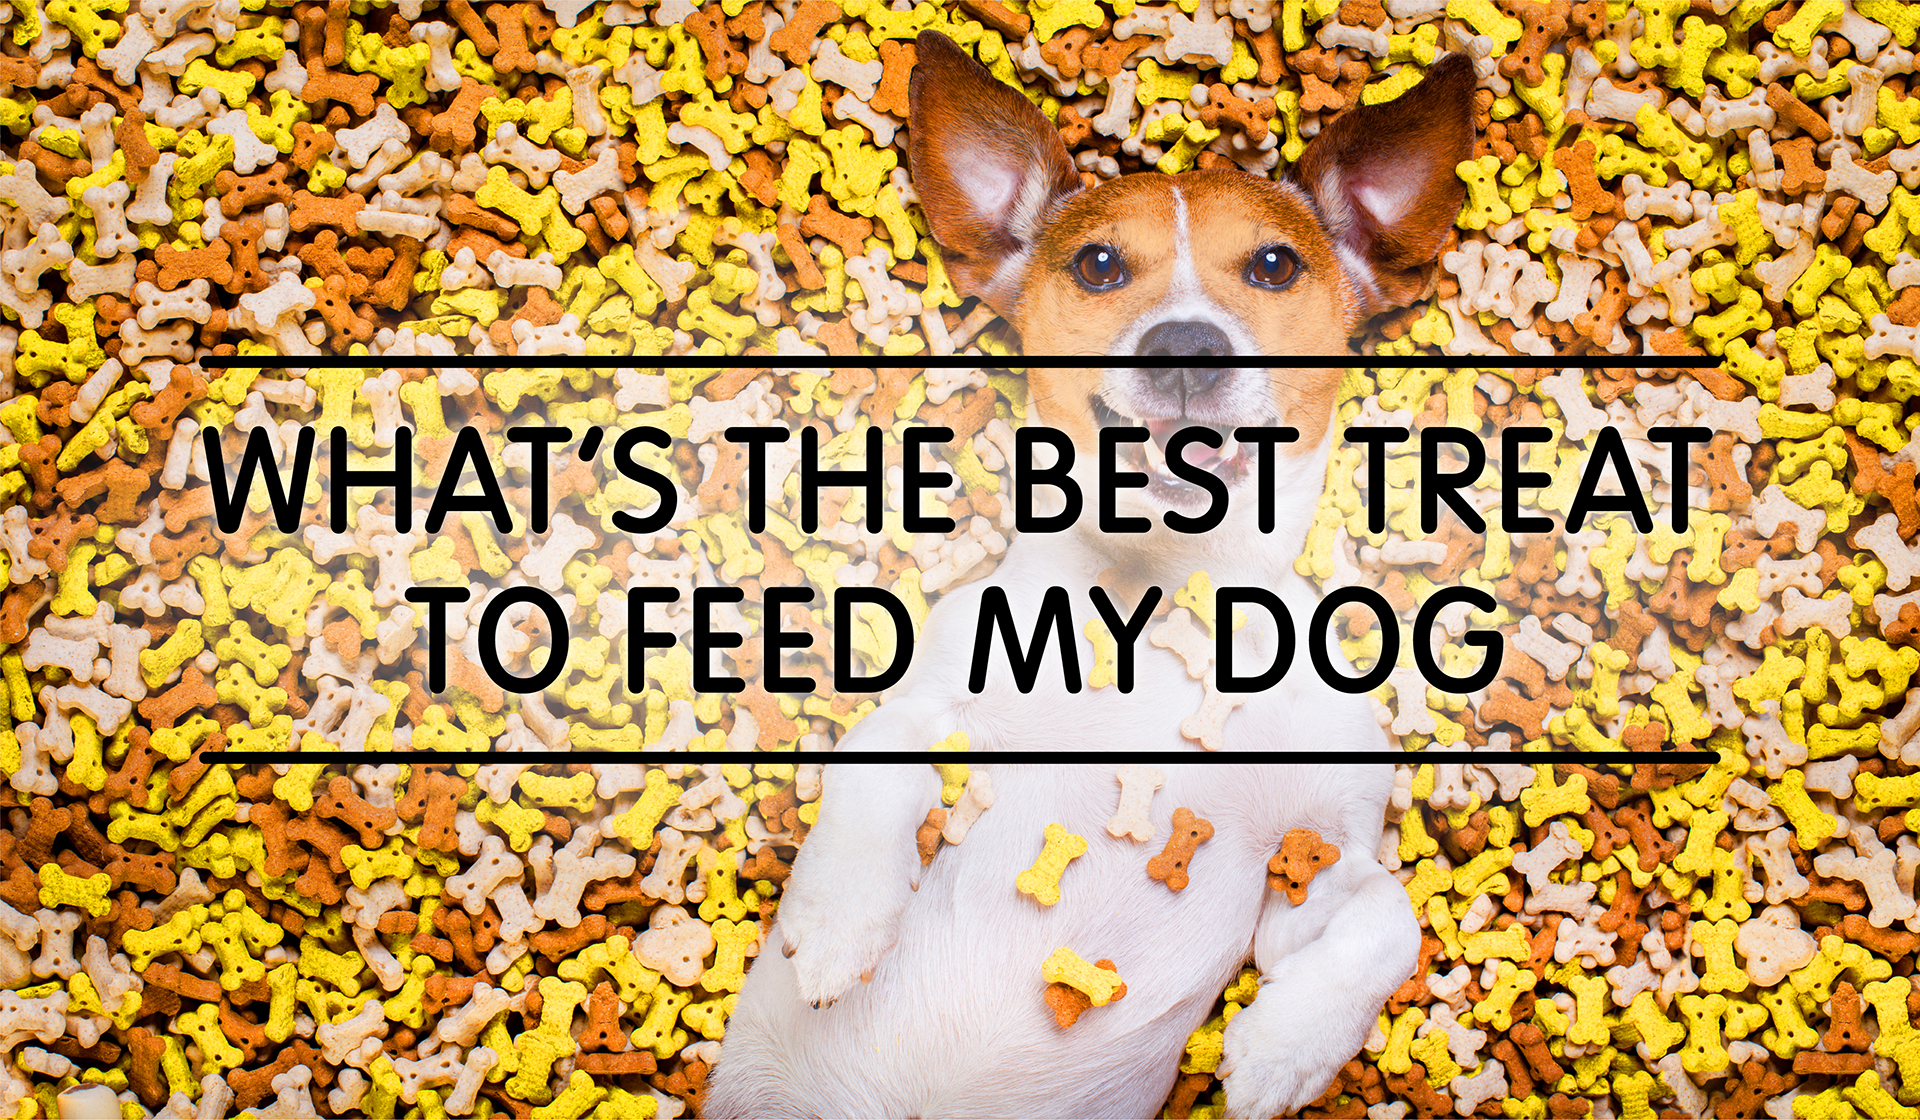 What’s The Best Treat To Feed My Dog?